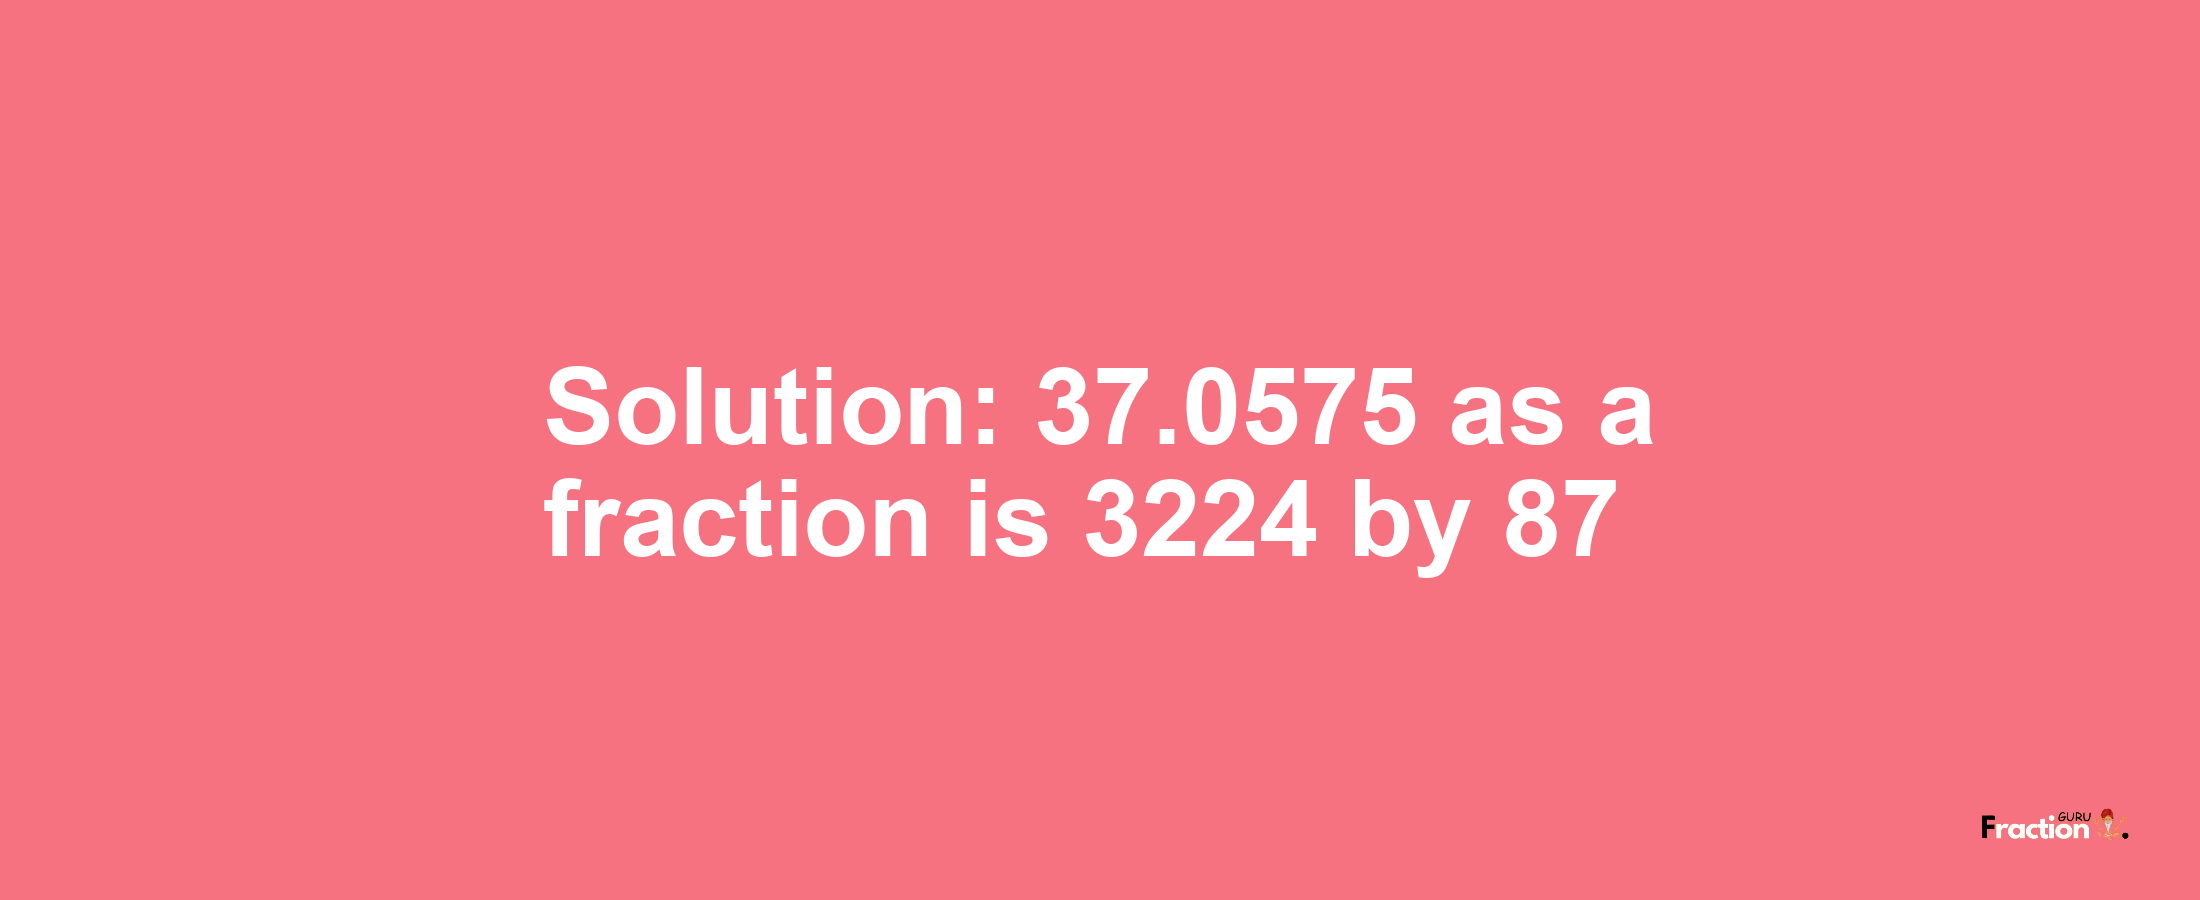 Solution:37.0575 as a fraction is 3224/87